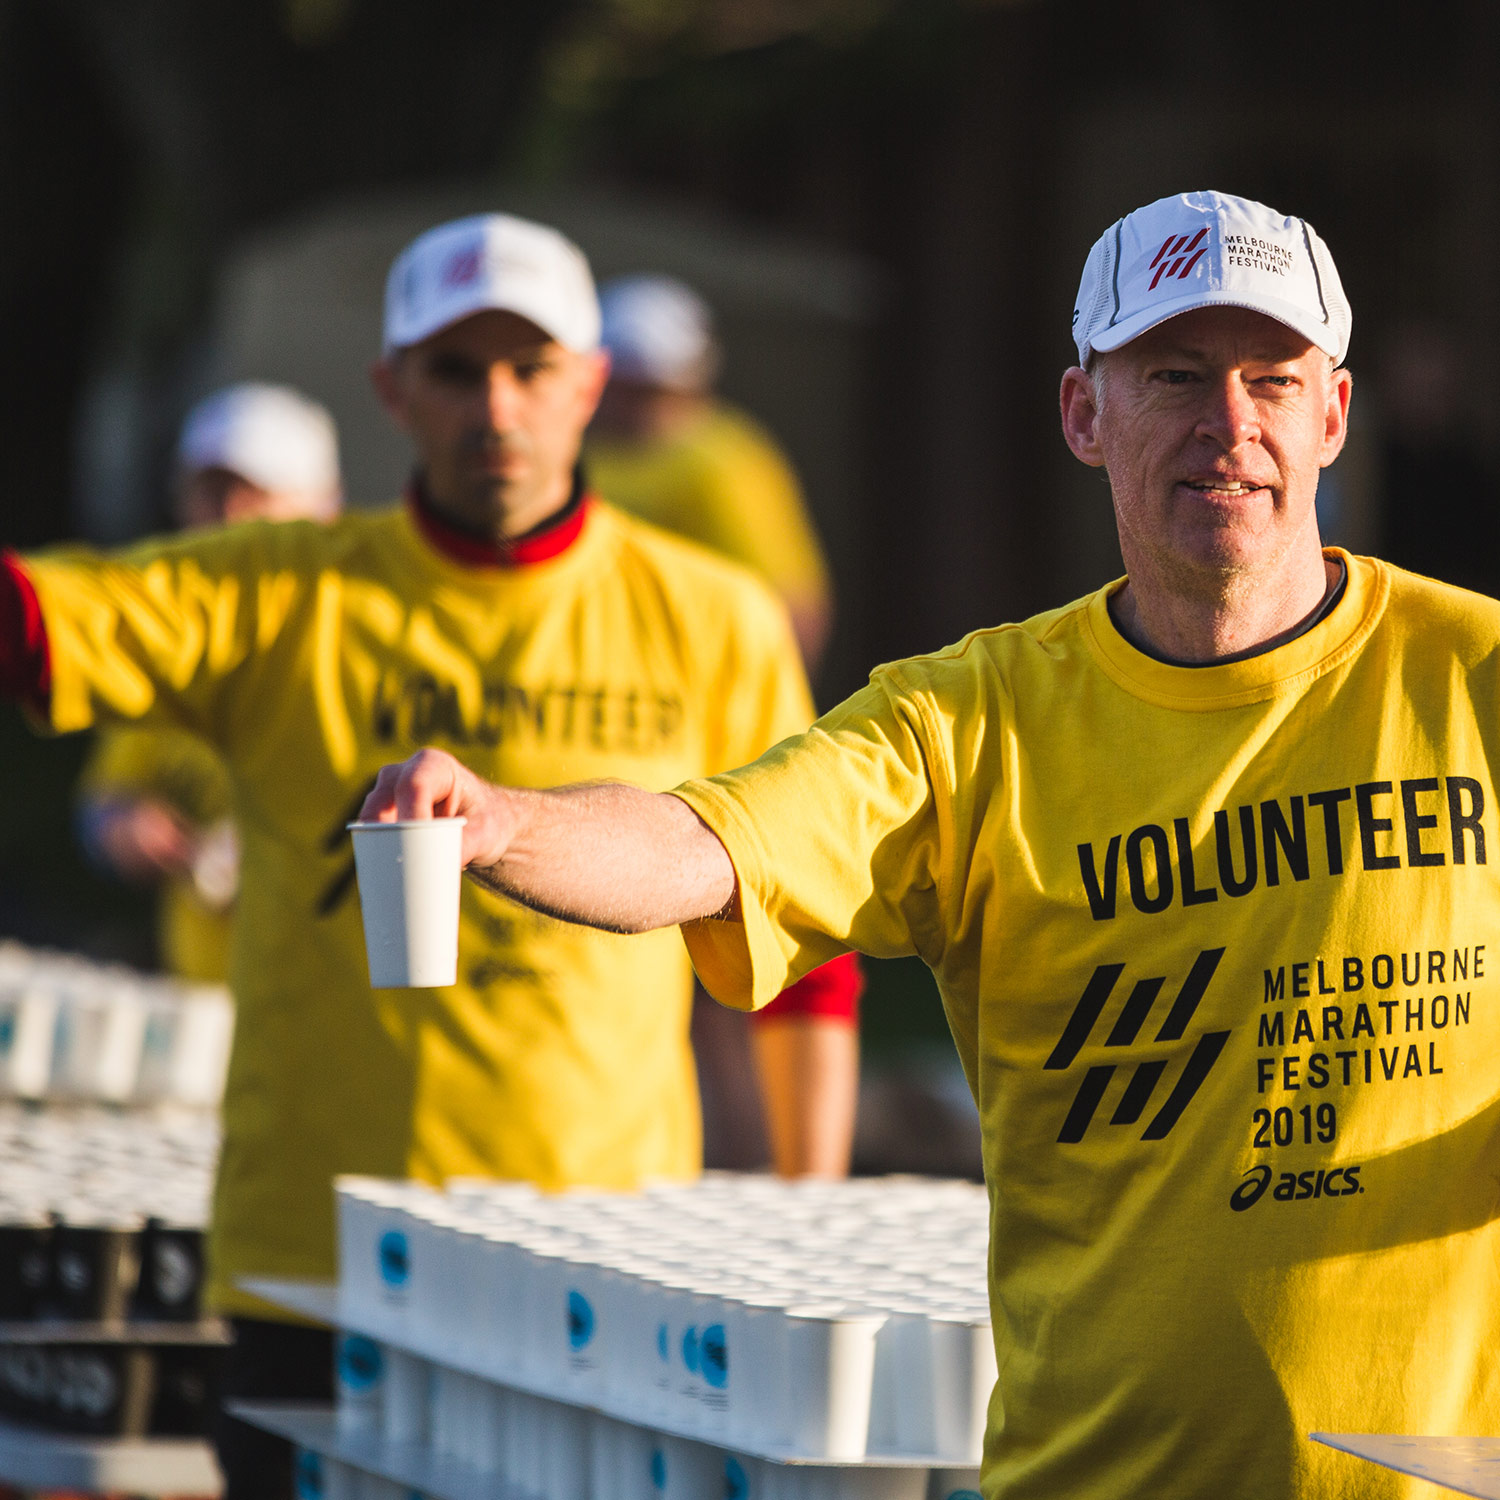 Image of a volunteer at the Melbourne Marathon handing out RecycleMe cups